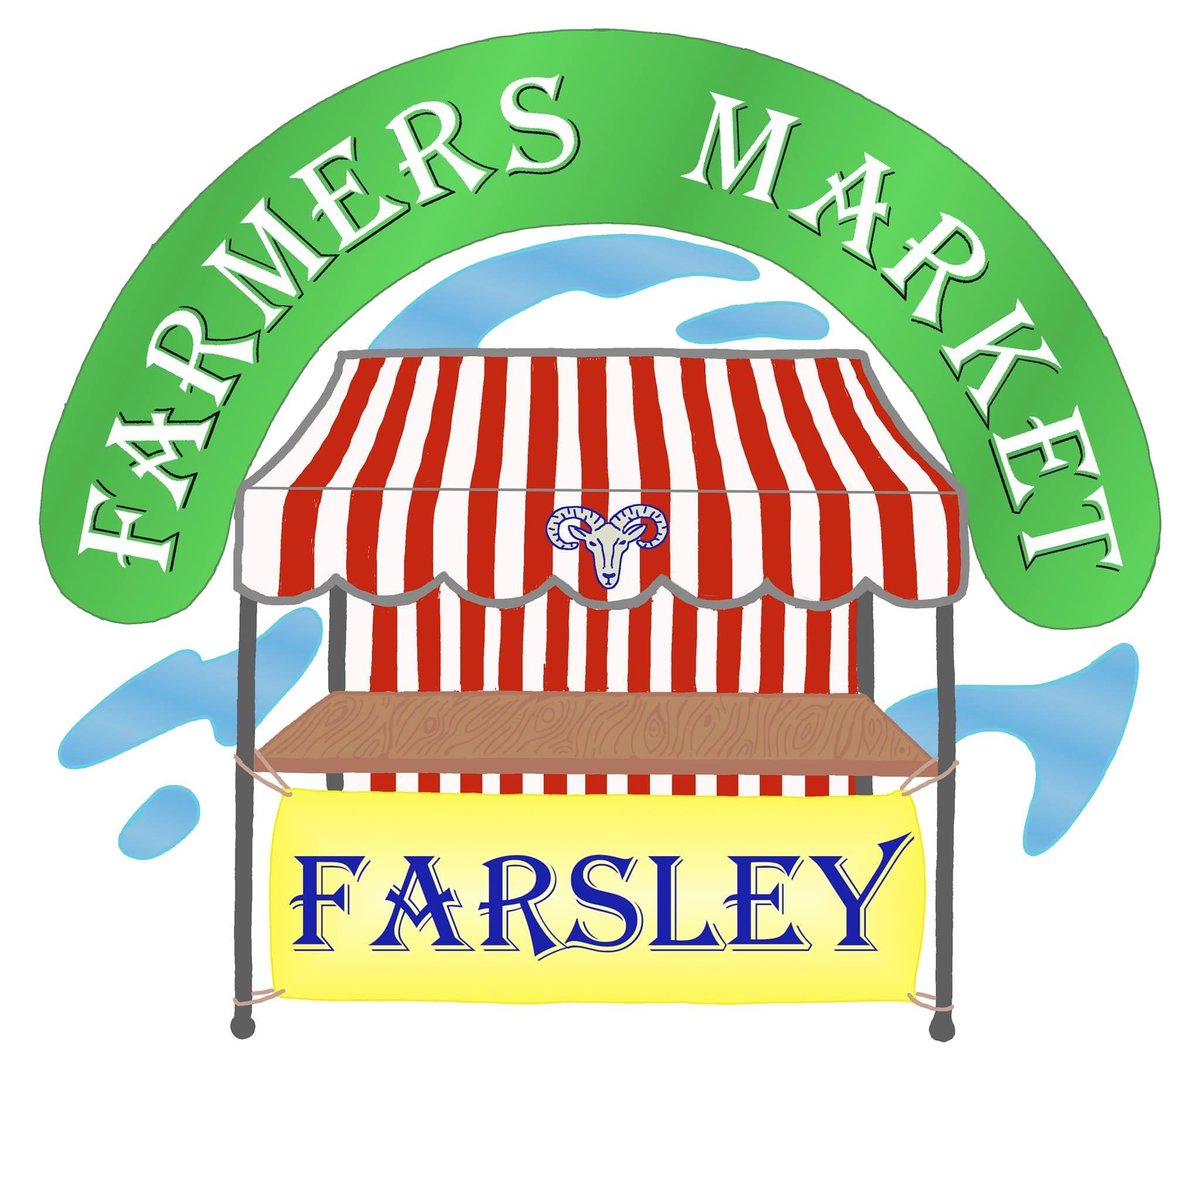 Good morning everybody. Hope you’re all well. Todays plan is to get everything ready for our stall tomorrow at the @FarsleyMarket. #shopindie #leeds #SmallBiz